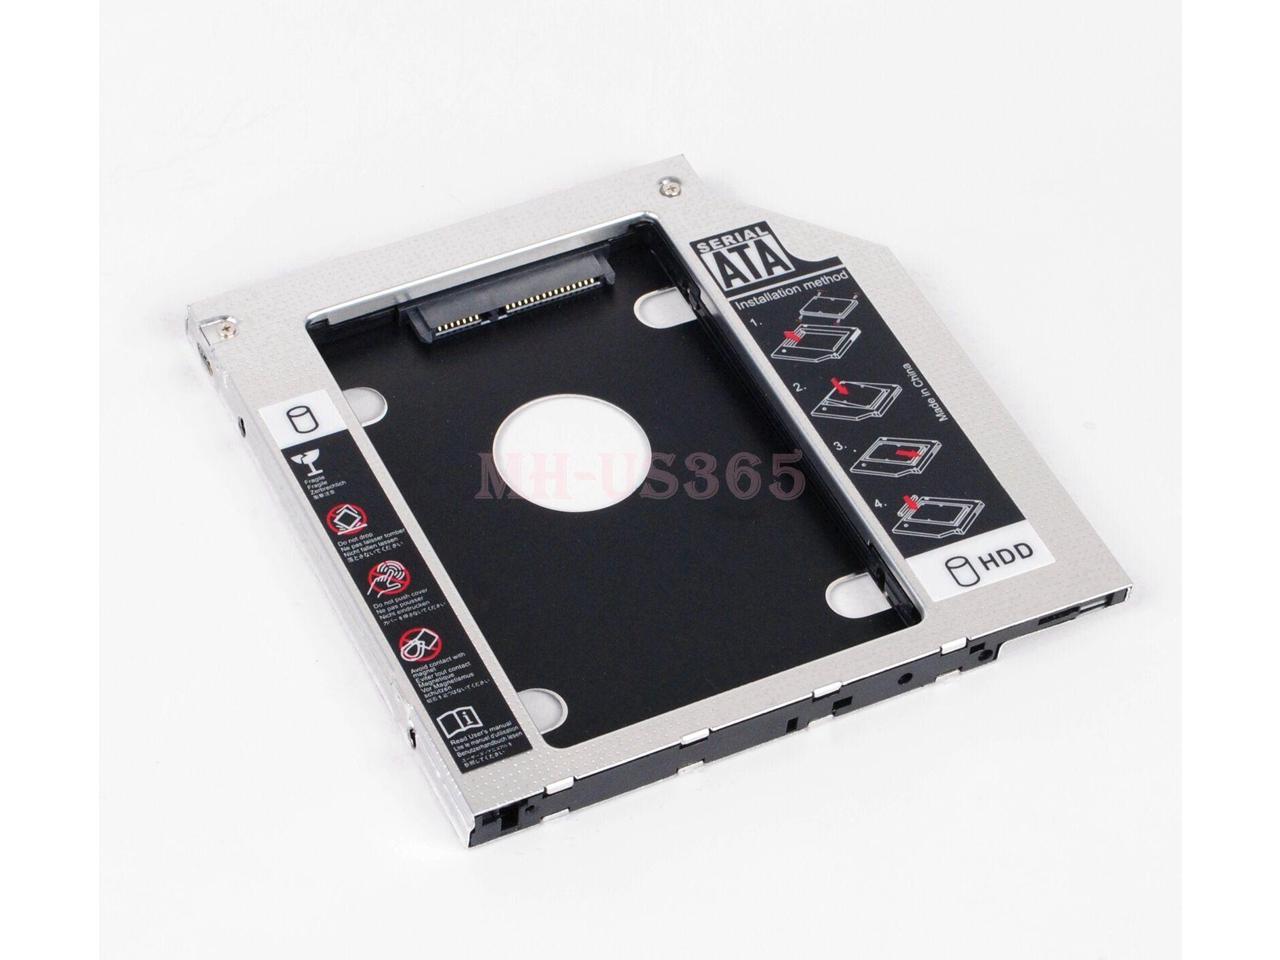 2nd 2.5 Hard Drive HDD SSD Caddy Adapter for Dell Inspiron 15 3537 14 3437 GU90N 